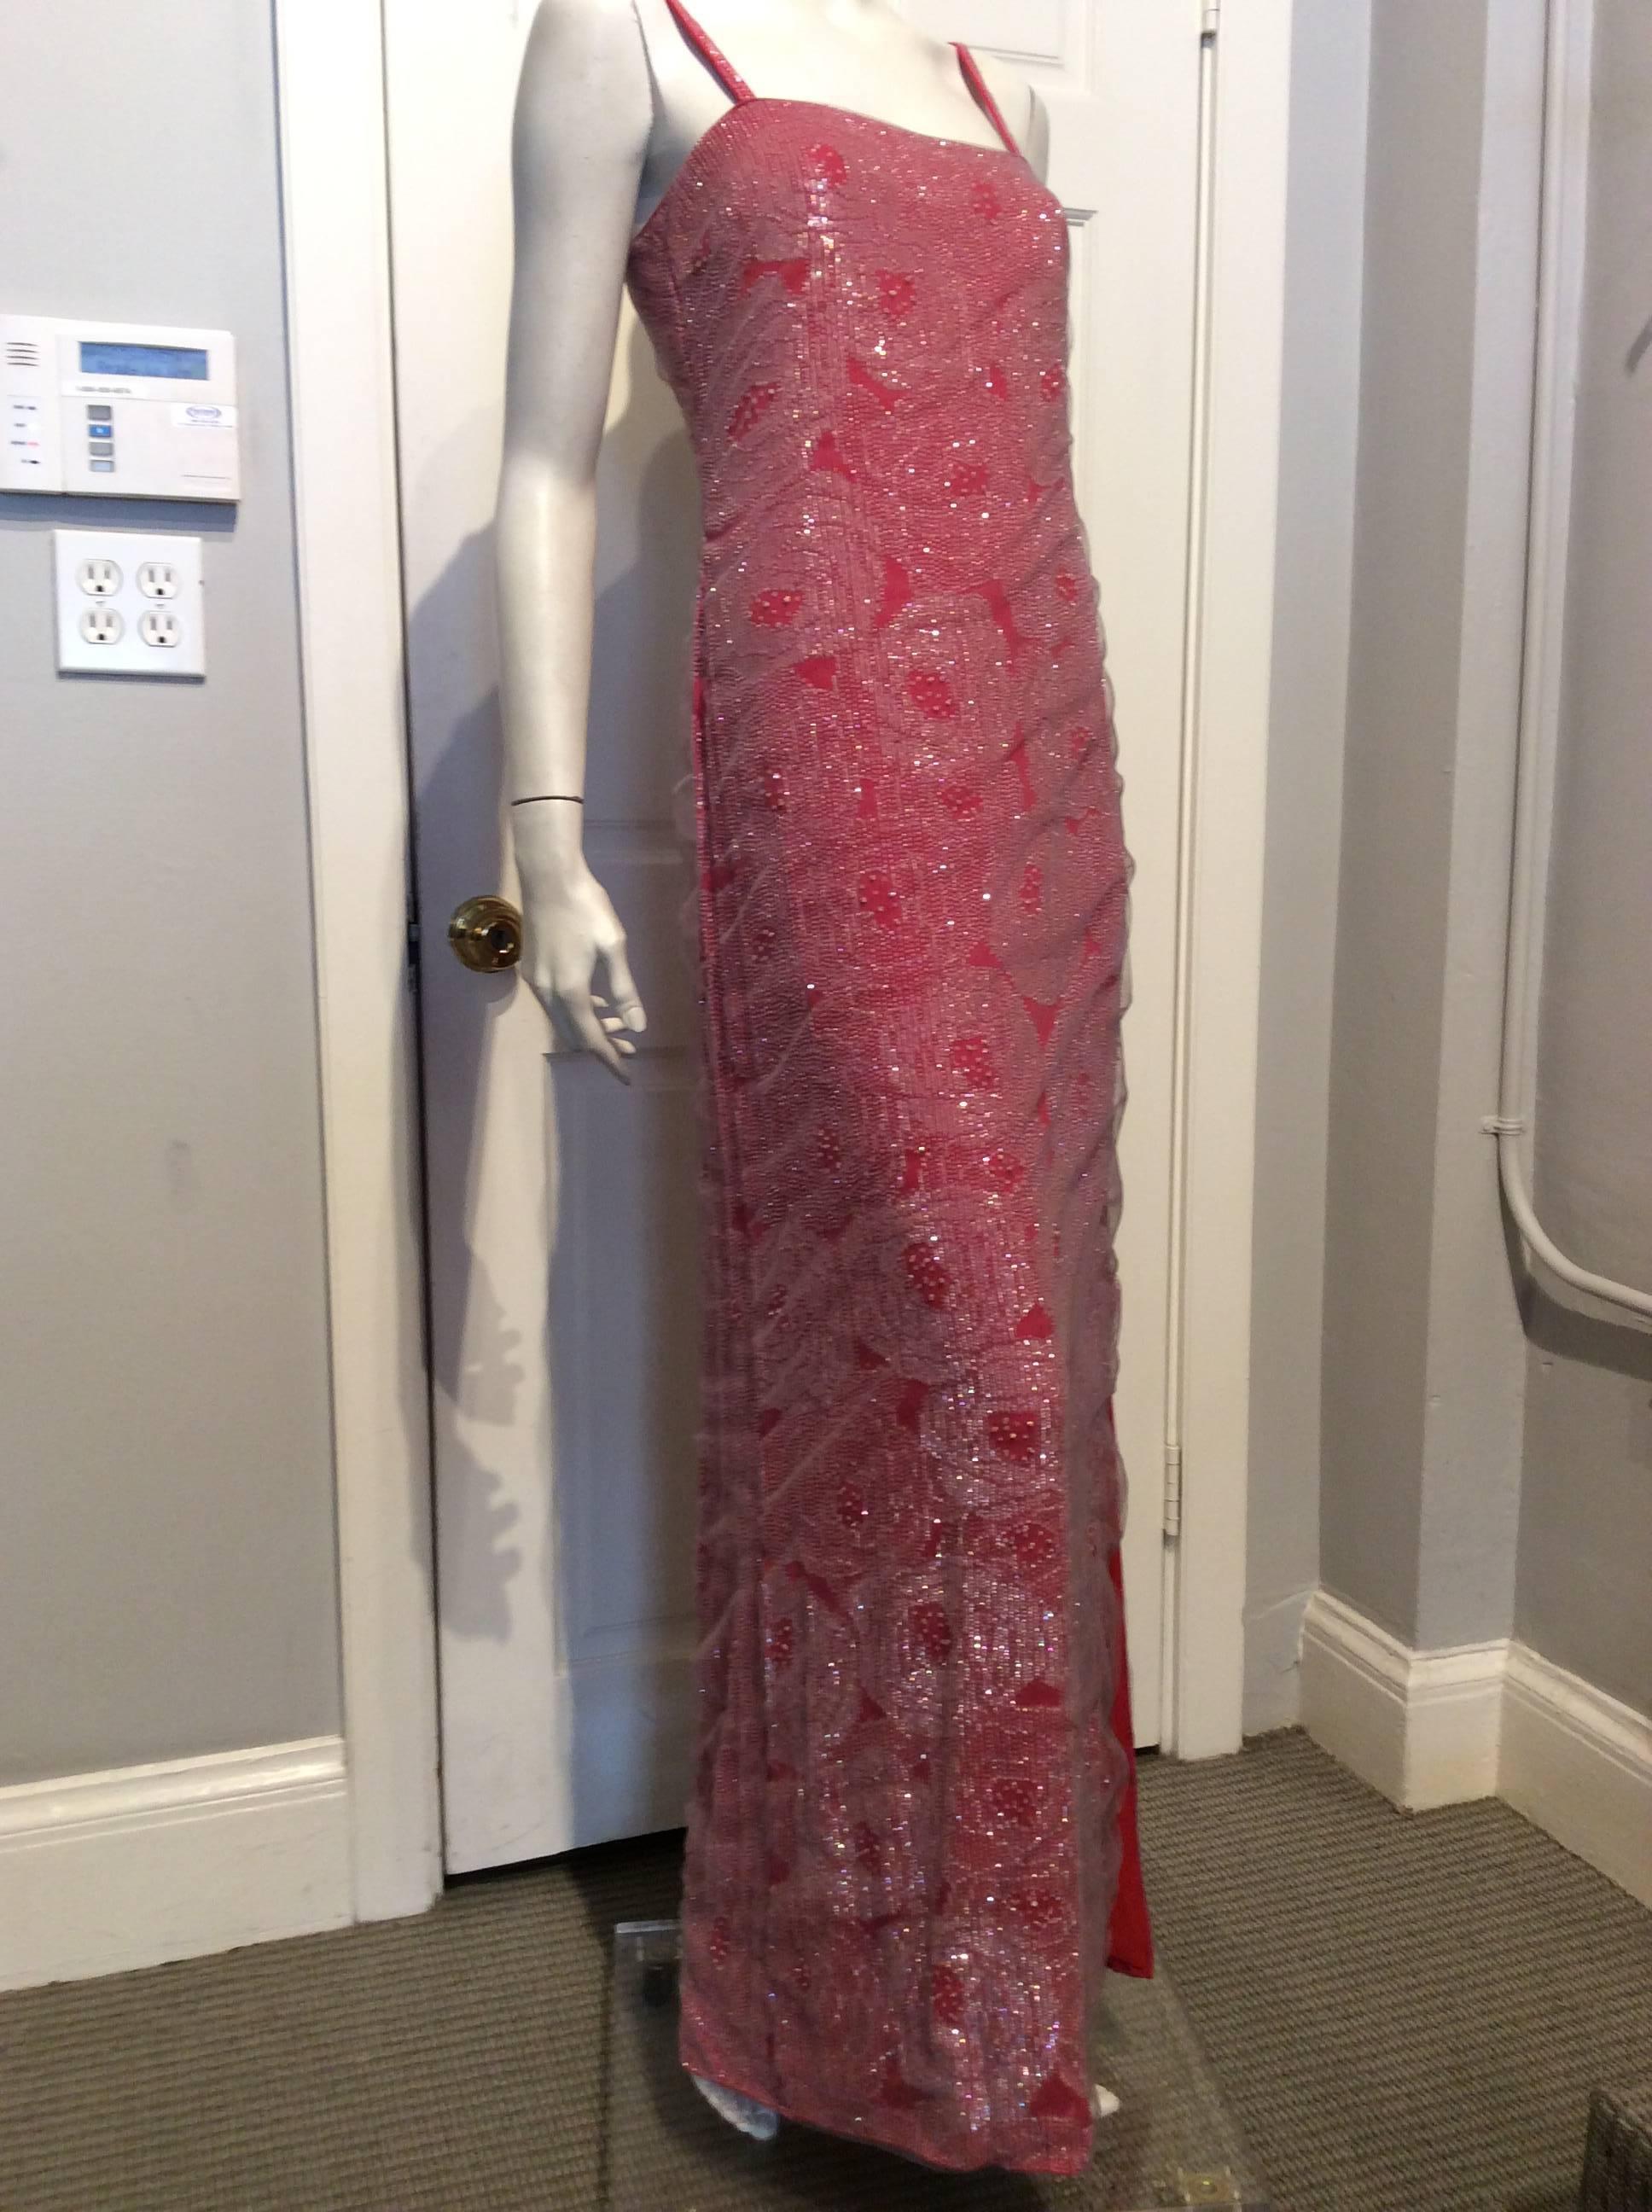 Giorgio Armani coral spaghetti strap evening gown, with silver and clear sequins and beads in elegant rose patterns.  The spaghetti straps are 3/8